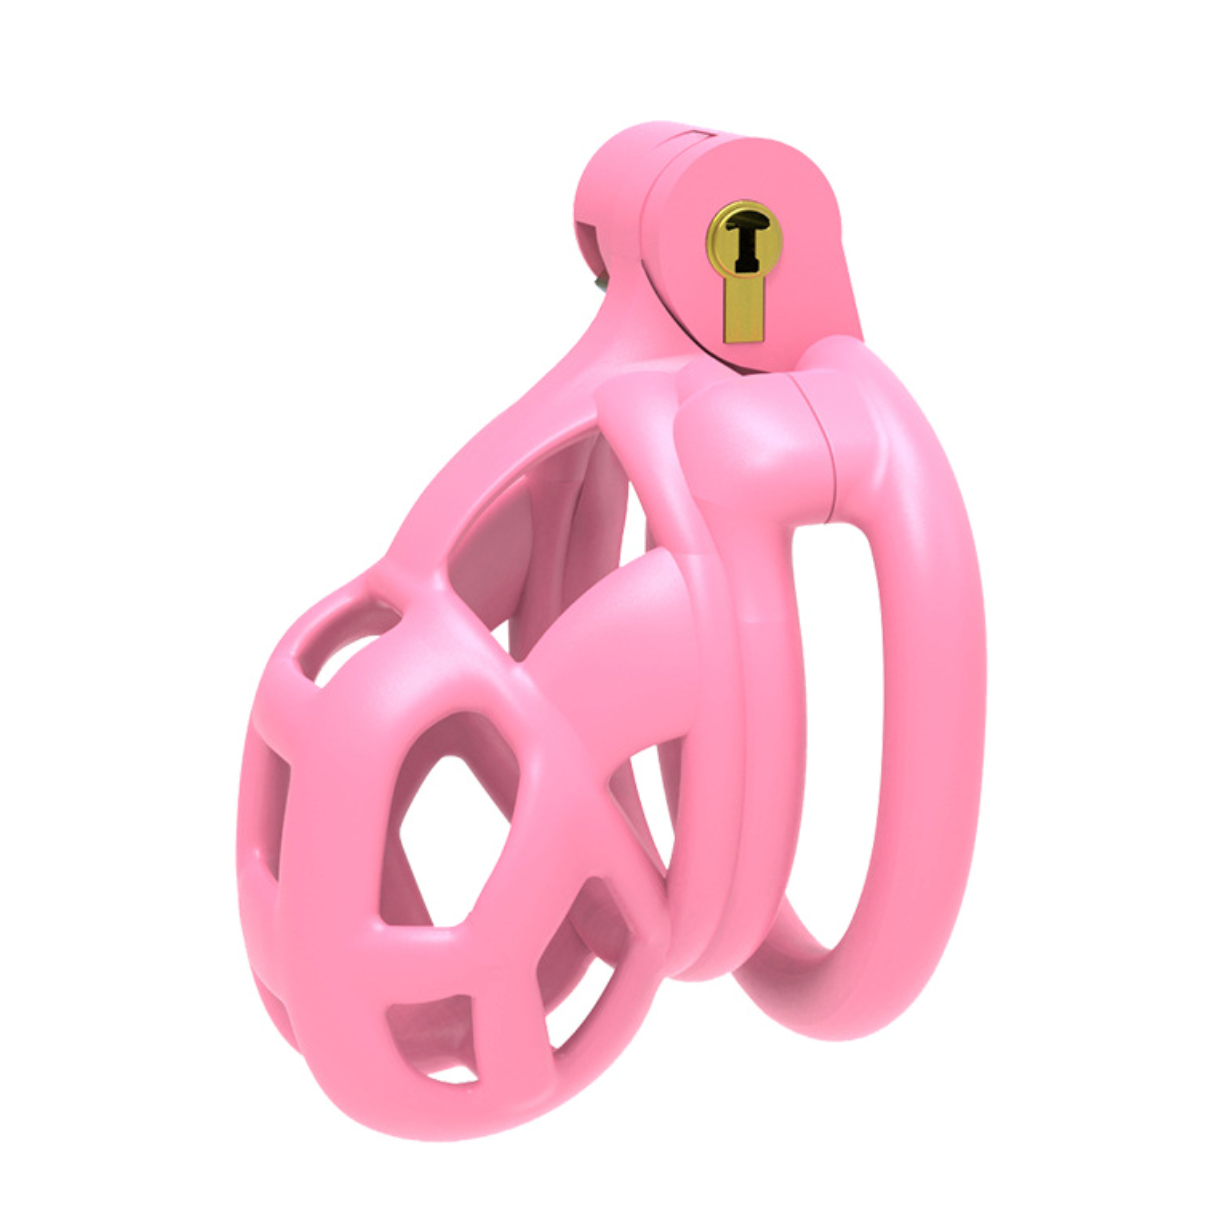 Pink Chastity Cuckold Device Male Cage 3D Print BDSM  [Cage + 4 Rings]  粉色贞操男用 BDSM  1611